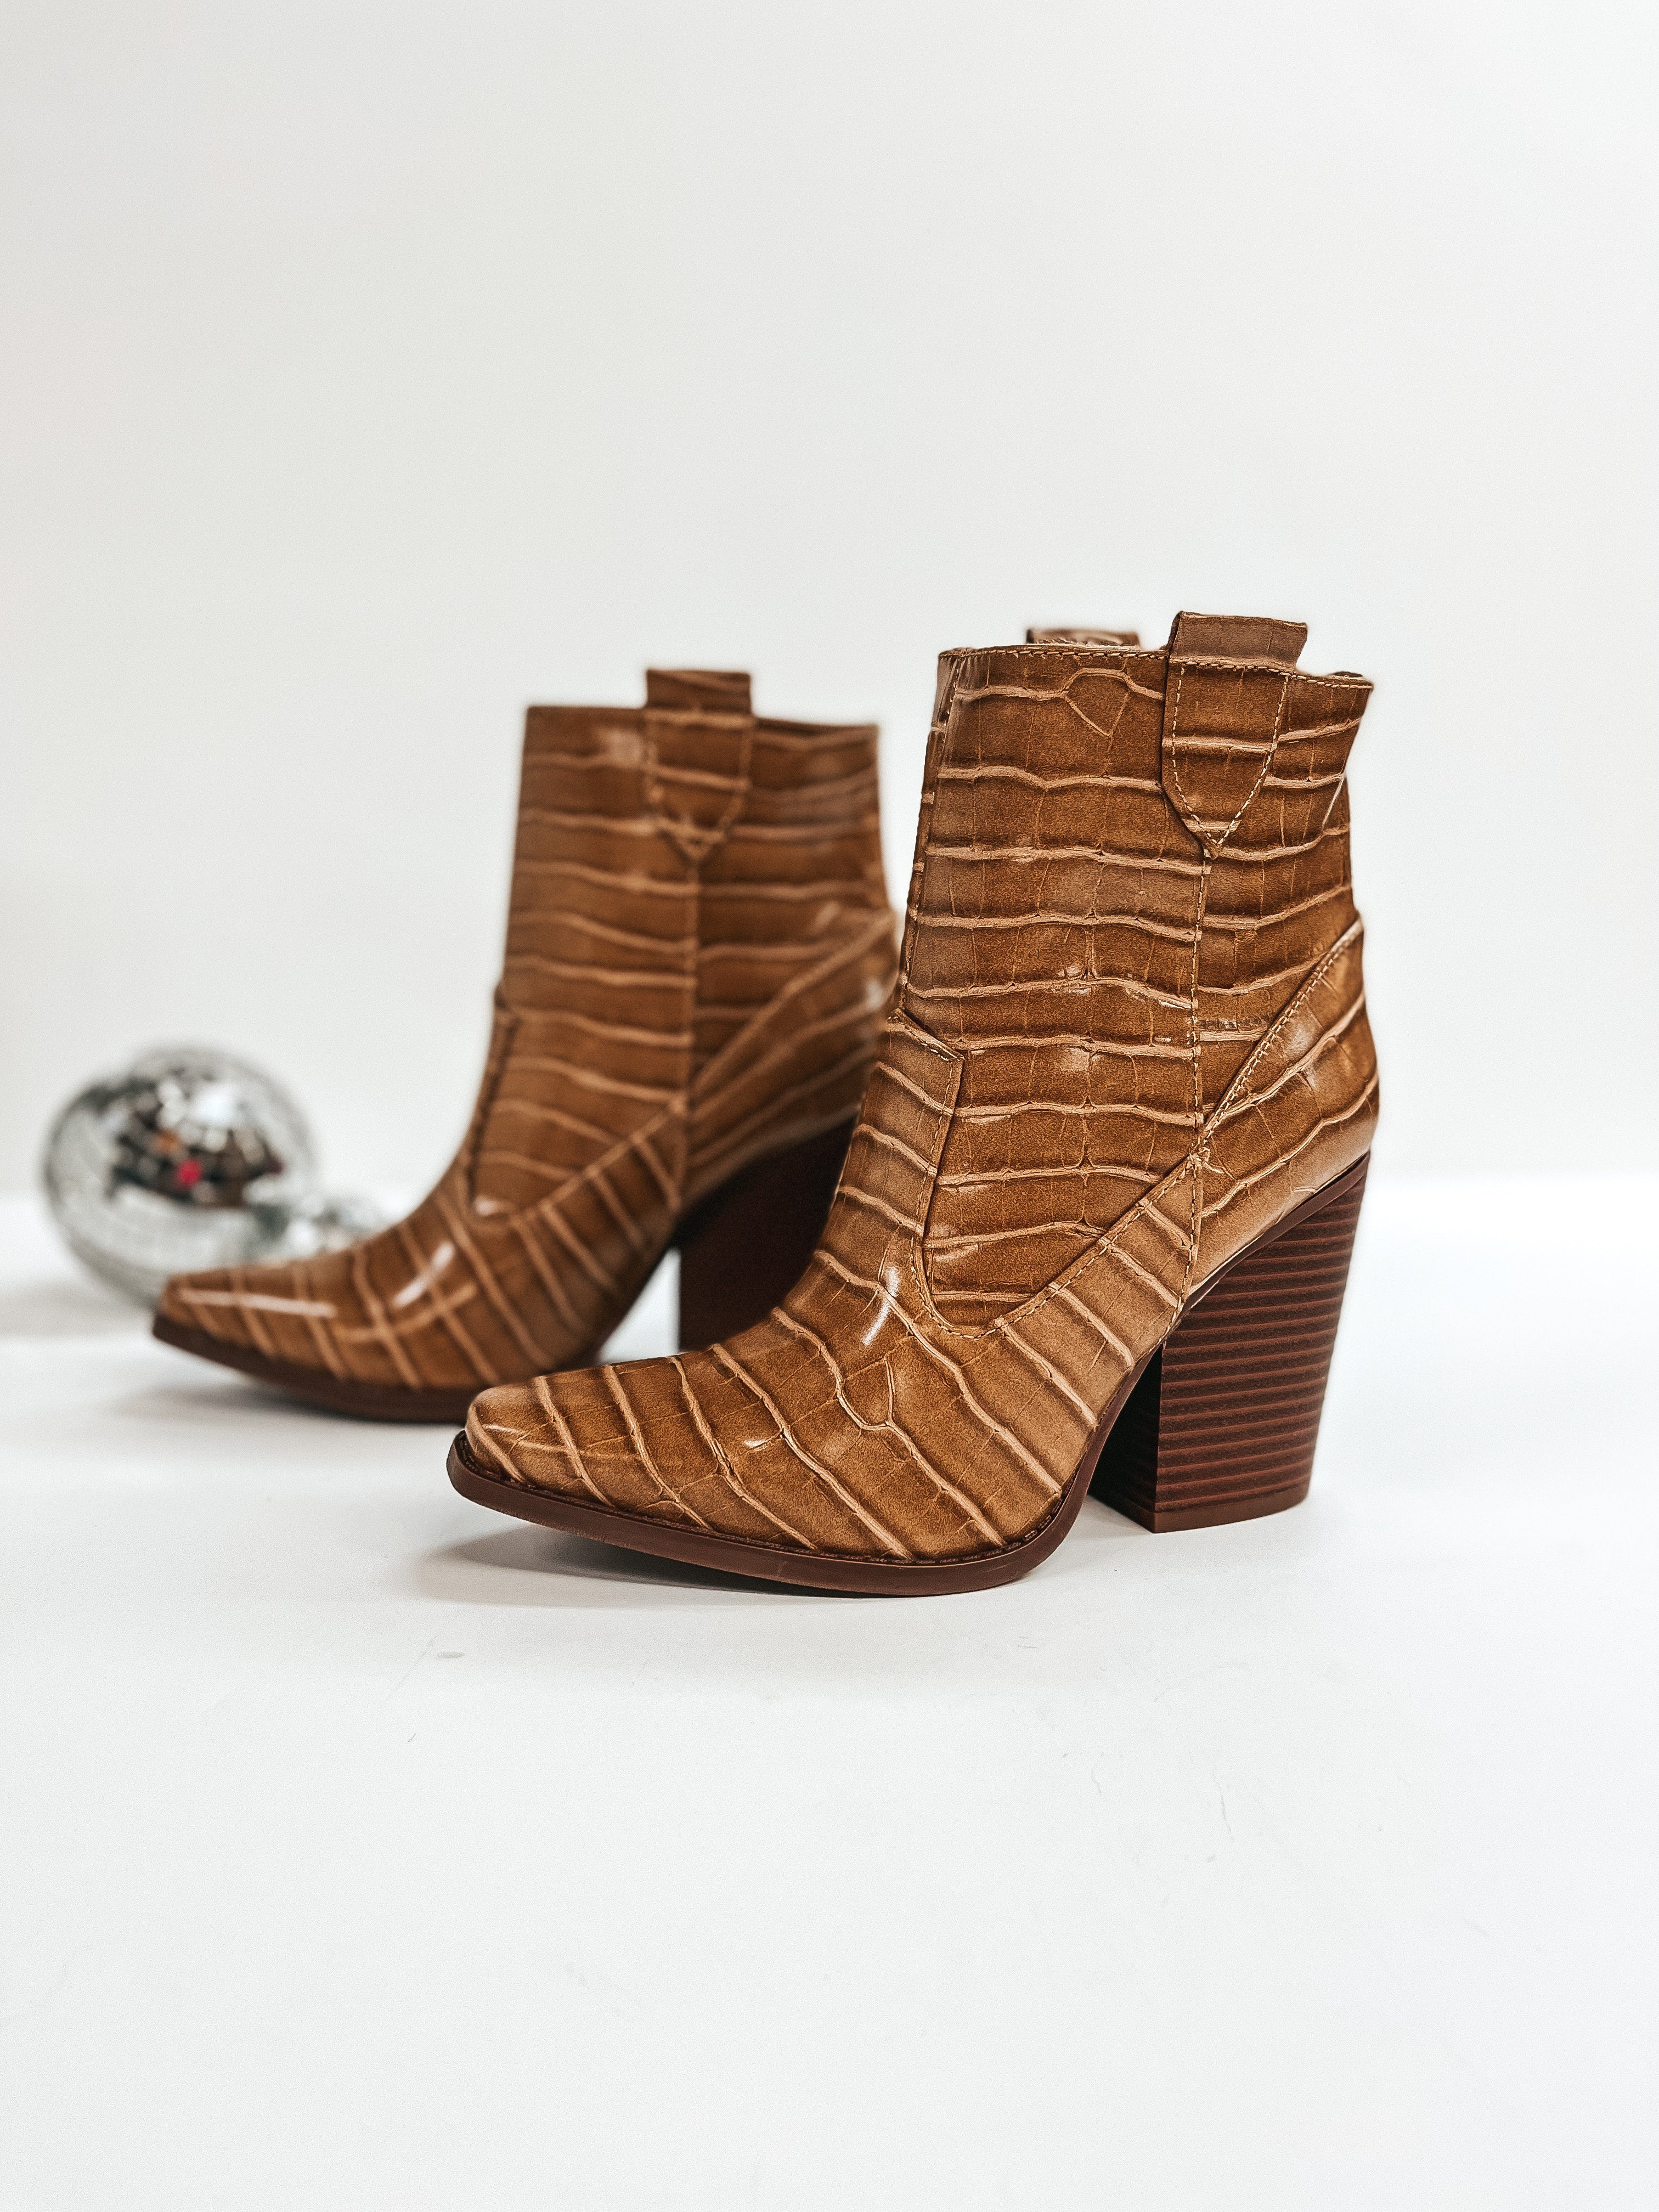 Broadway Strut Crocodile Print Heeled Ankle Booties in Caramel Brown - Giddy Up Glamour Boutique